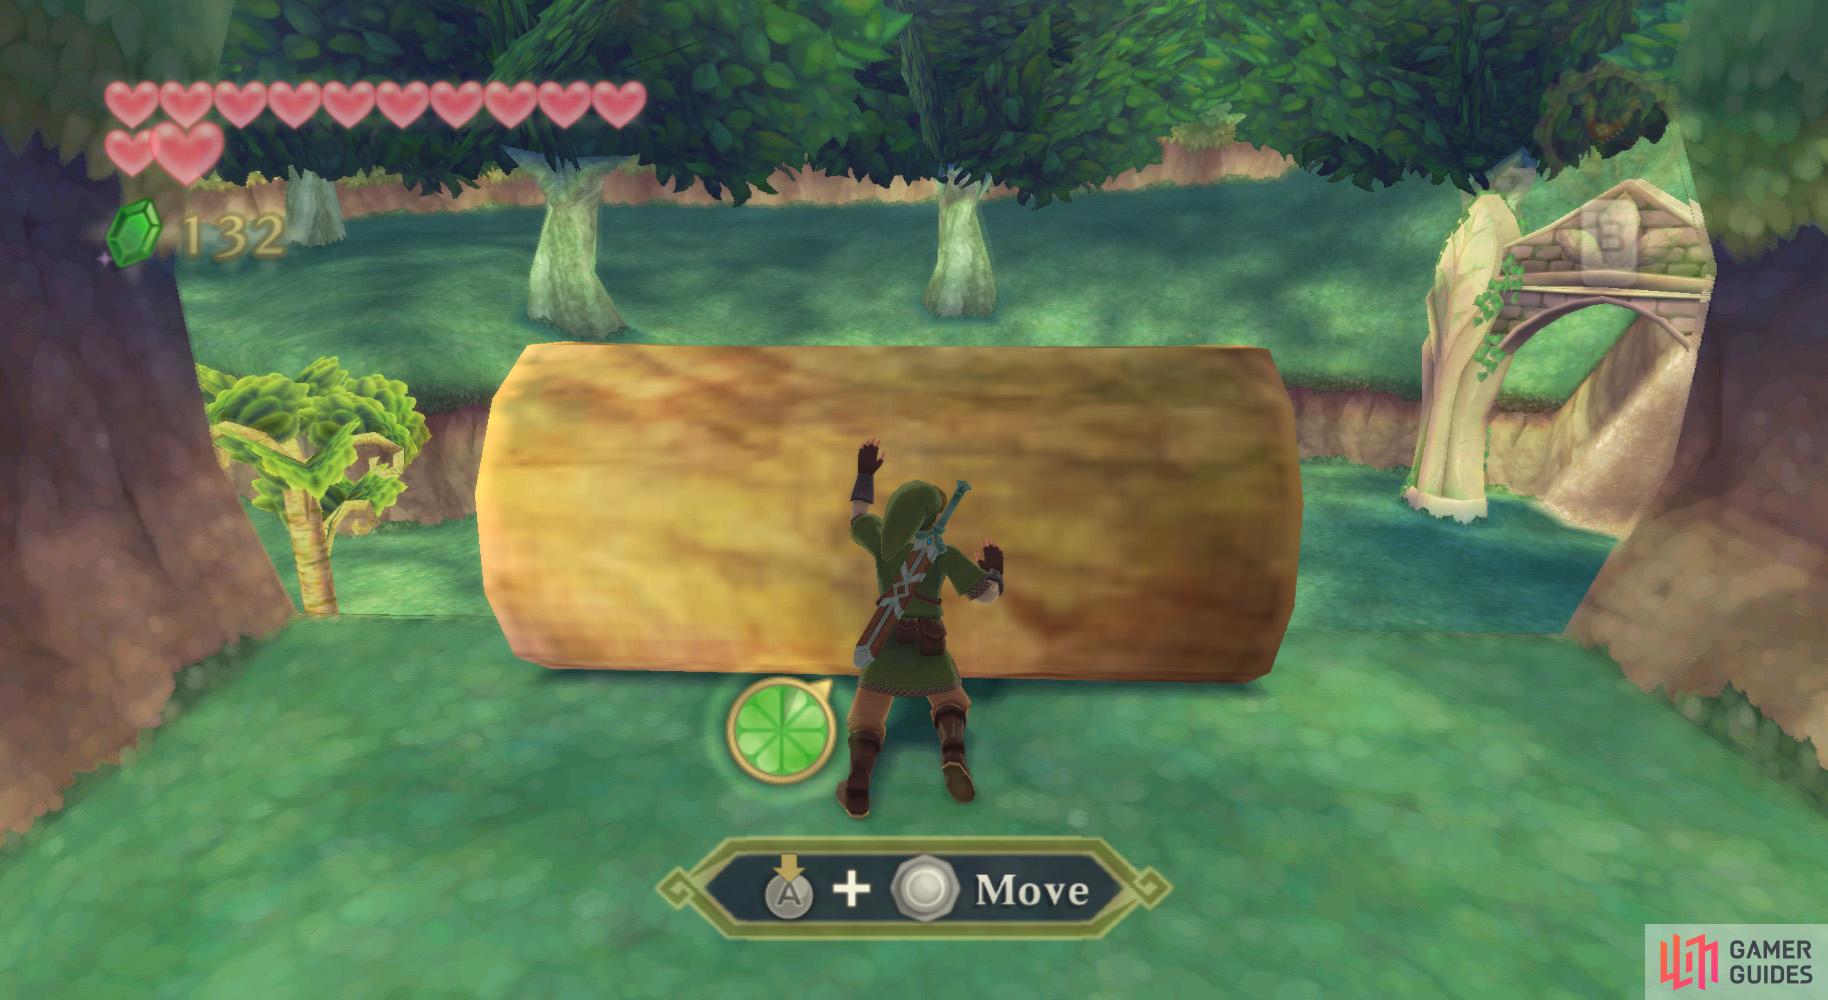 Take a right and push the log to create yet another shortcut.